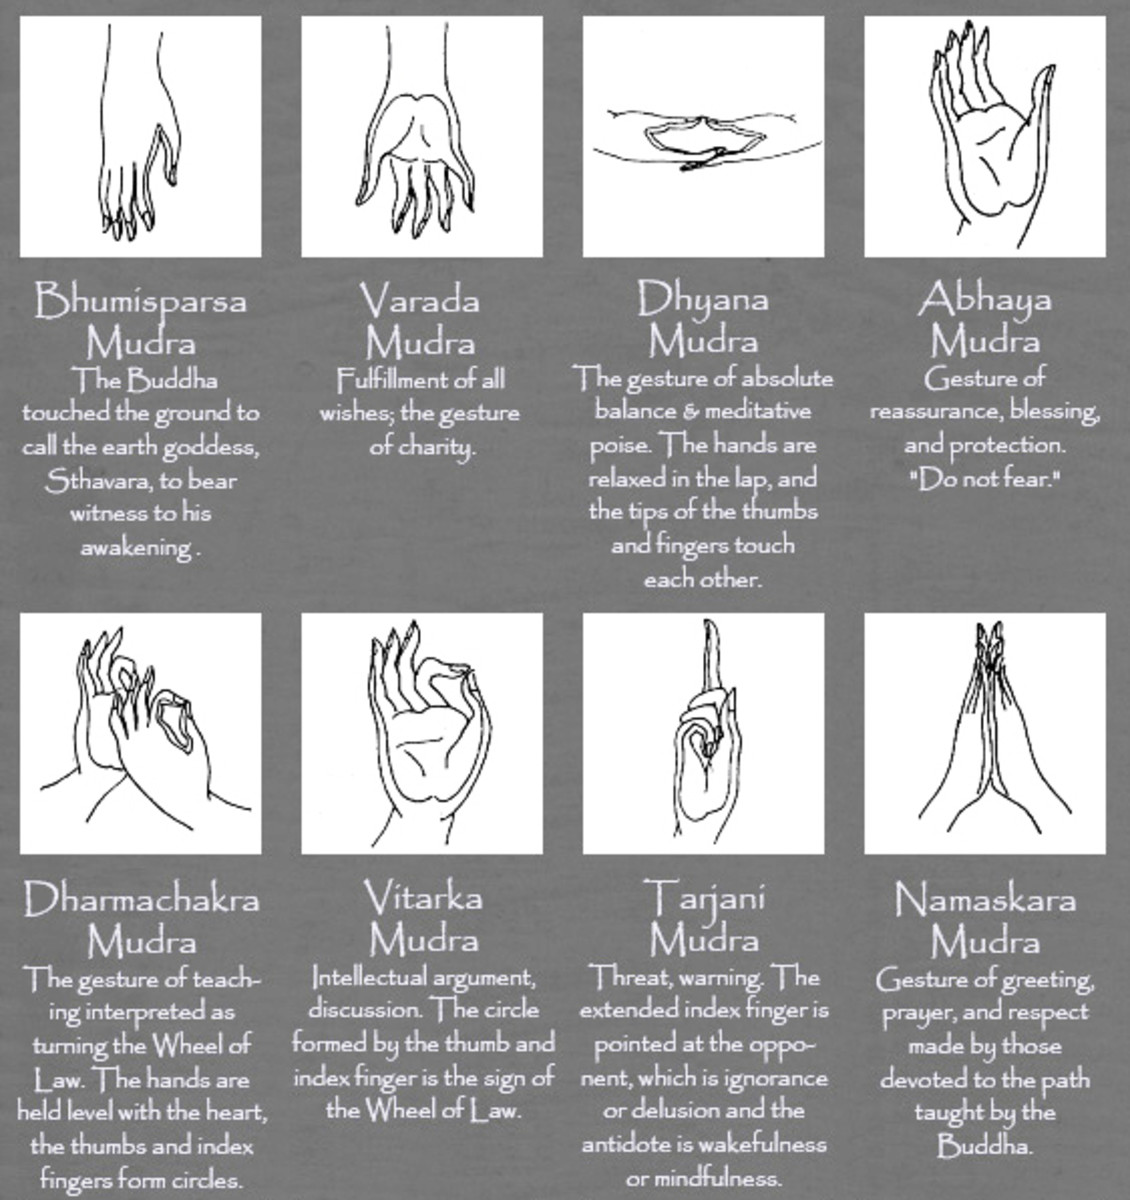 The Mudras or hand Gestures of the Buddha